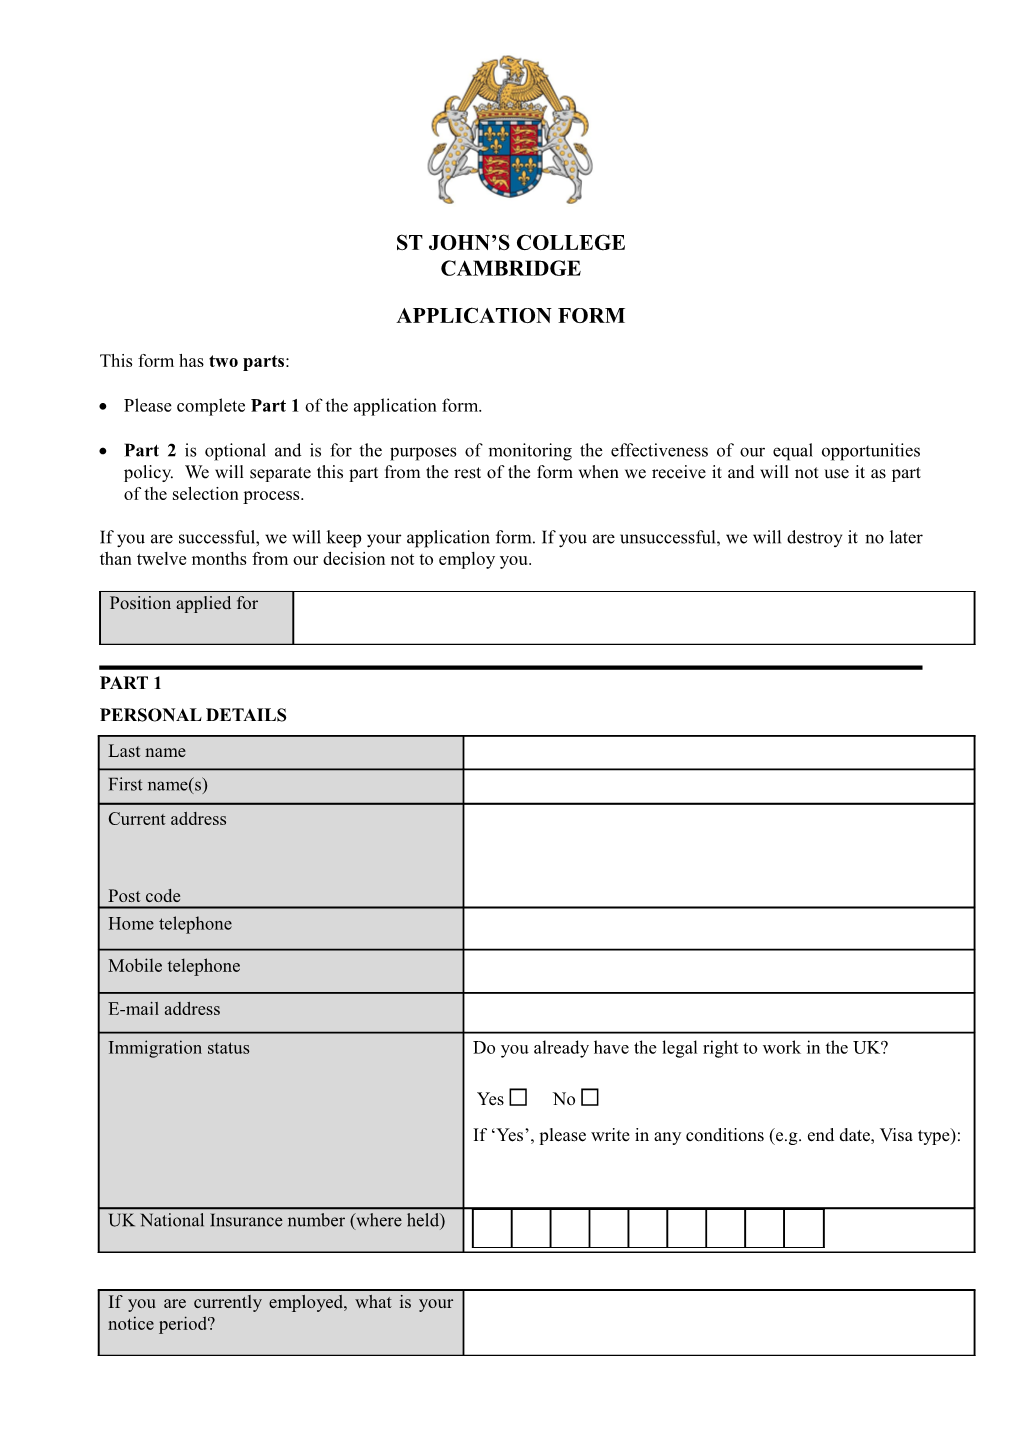 Application Form s9